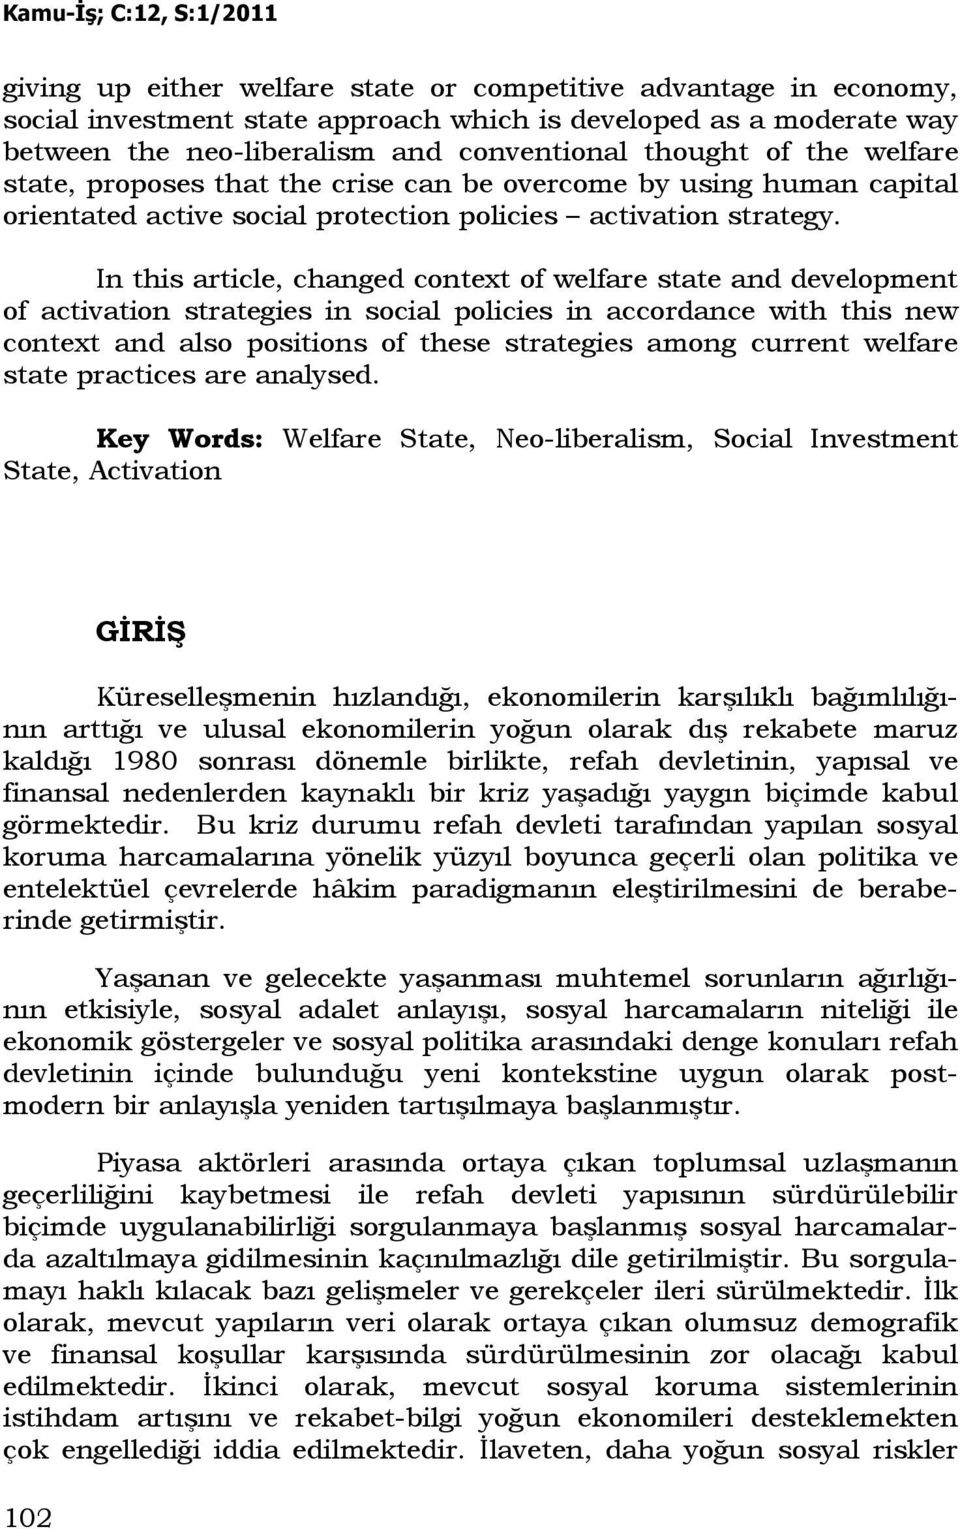 In this article, changed context of welfare state and development of activation strategies in social policies in accordance with this new context and also positions of these strategies among current